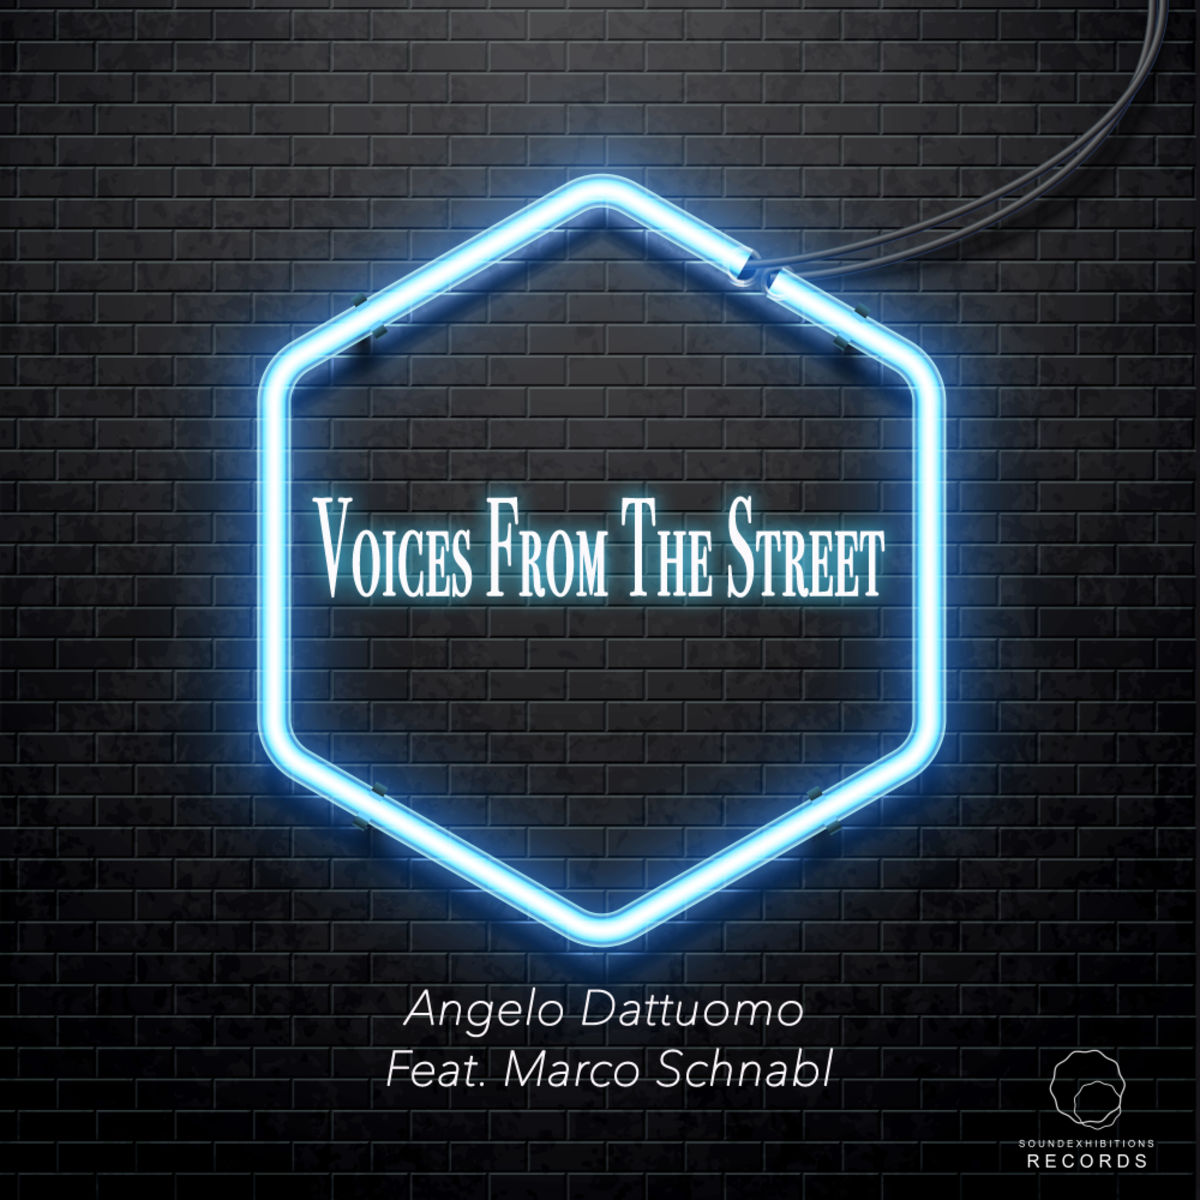 Angelo Dattuomo ft Marco Schnabl - Voices From The Street / Sound Exhibitions Records